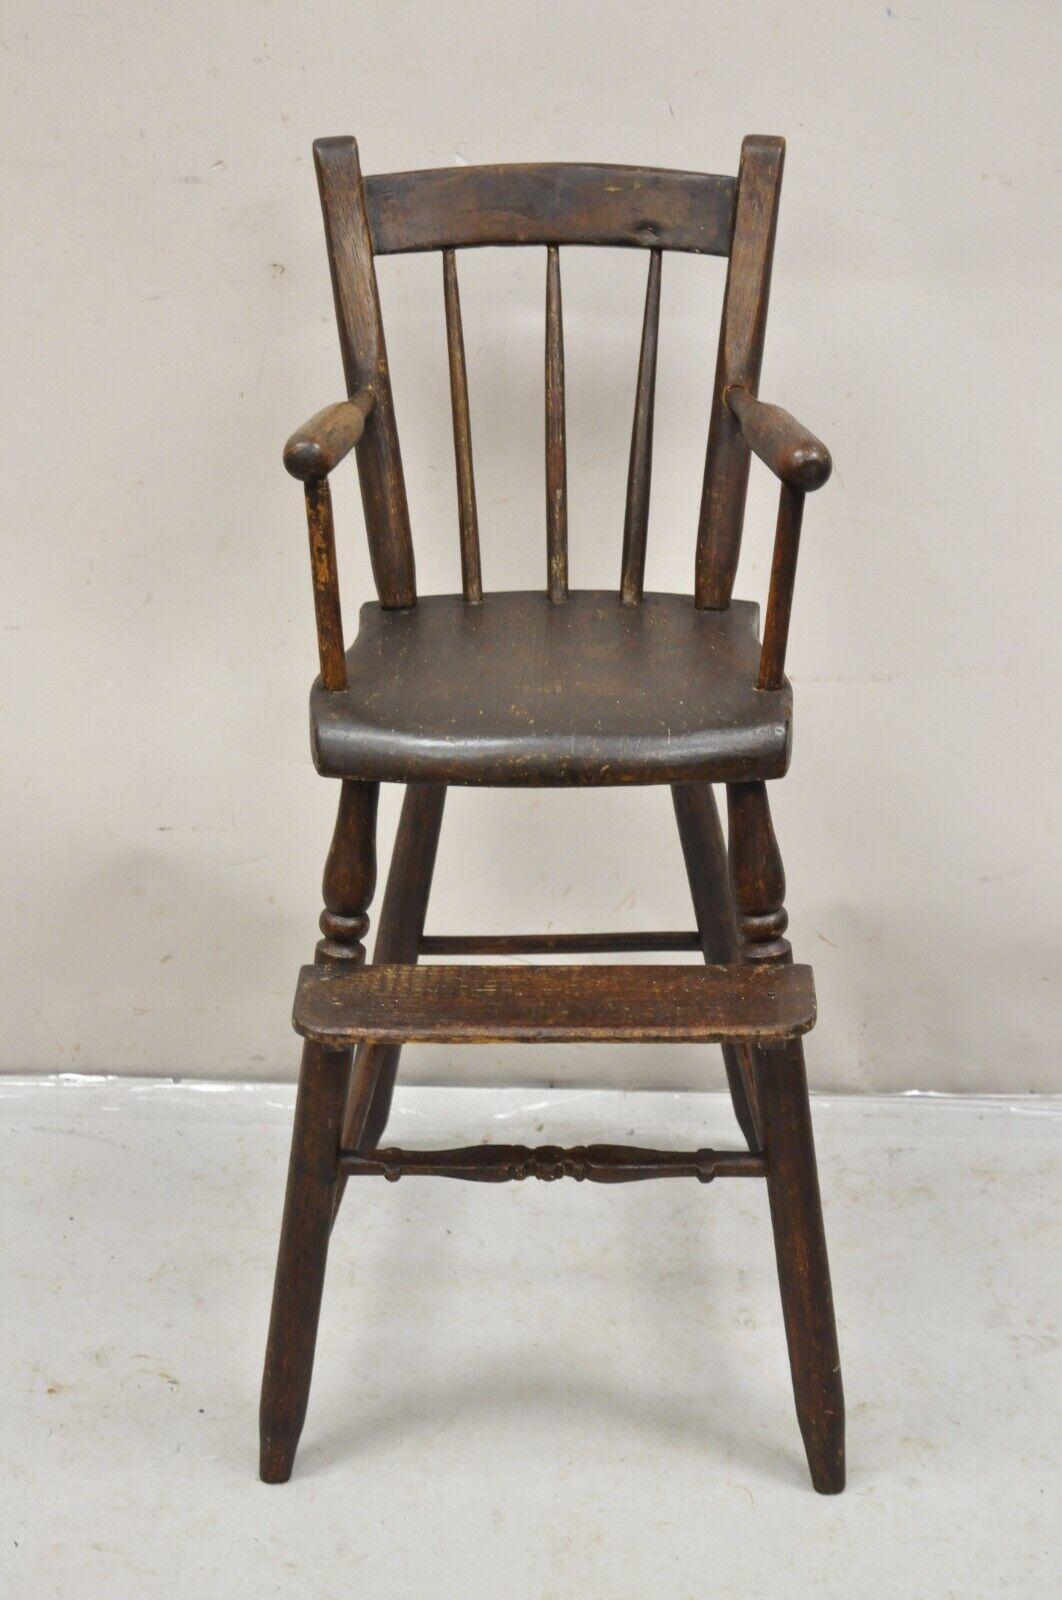 Antique French Country Primitive Provincial Oak Wood Small Child's High Chair. Circa 19th Century. Measurements: 34